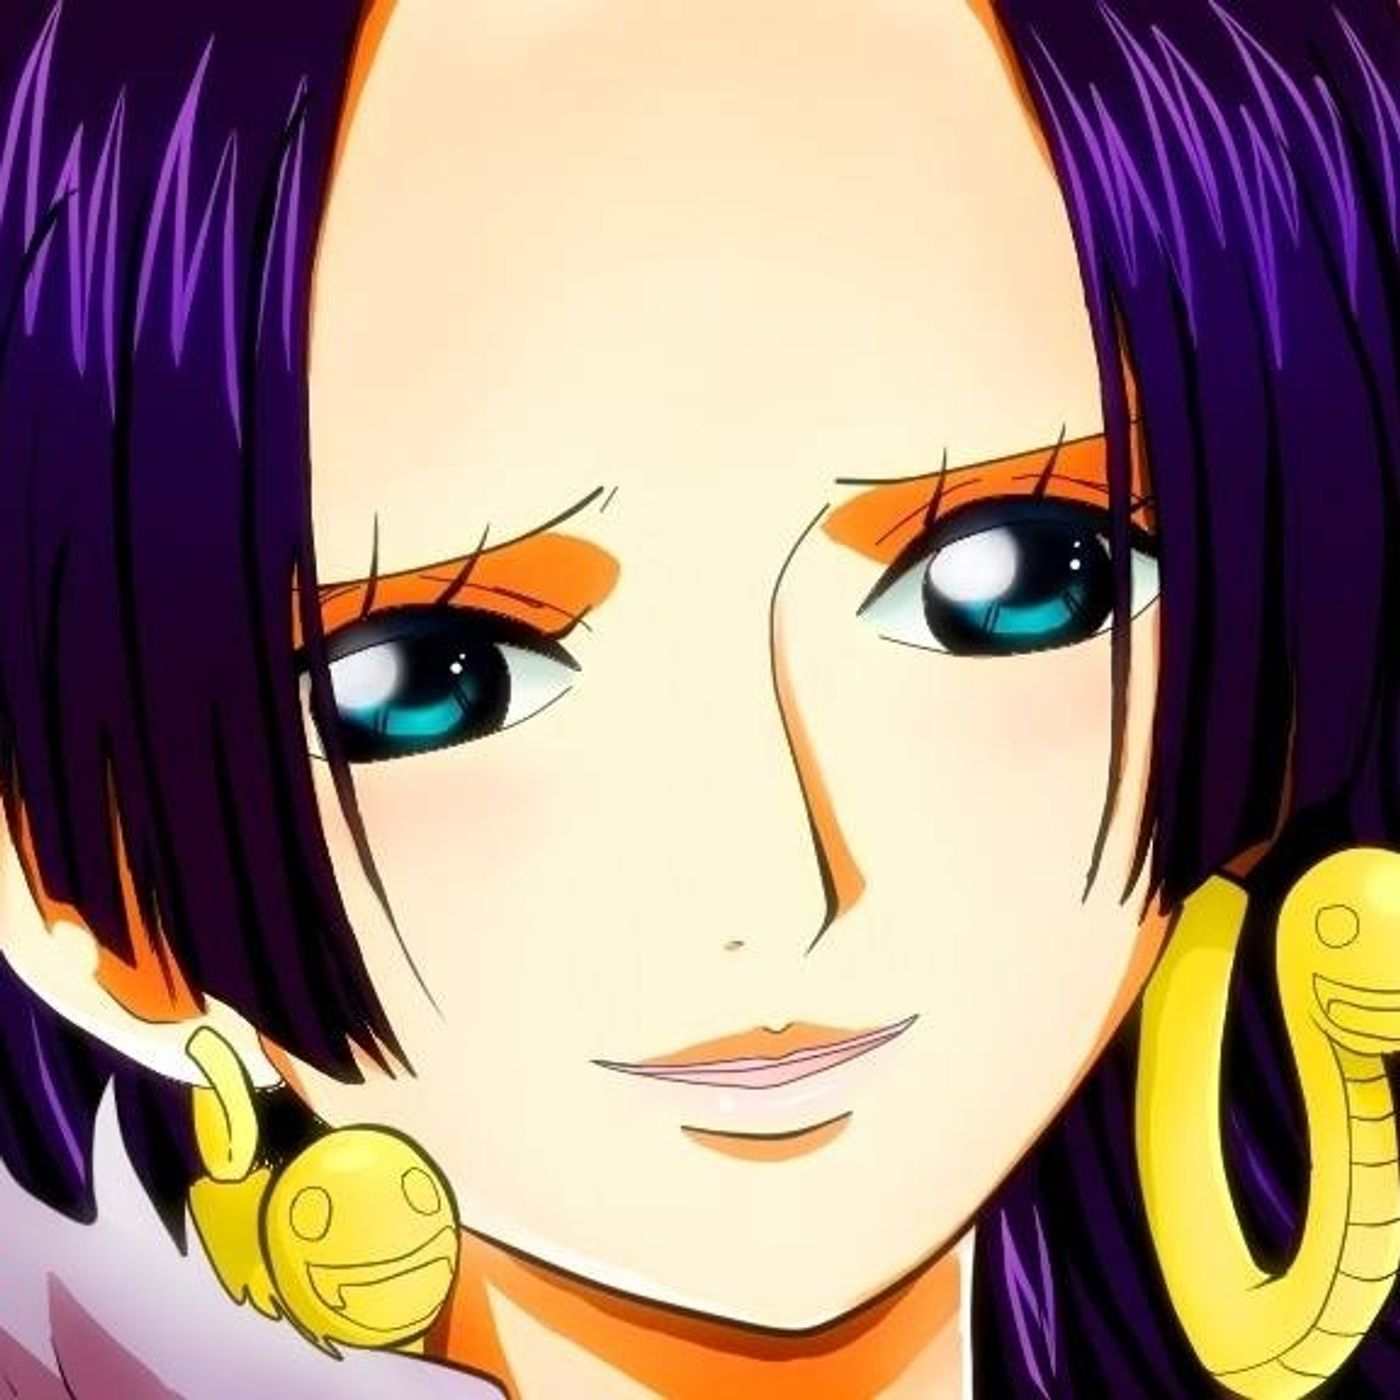 Episode 1008 - One Piece - Anime News Network